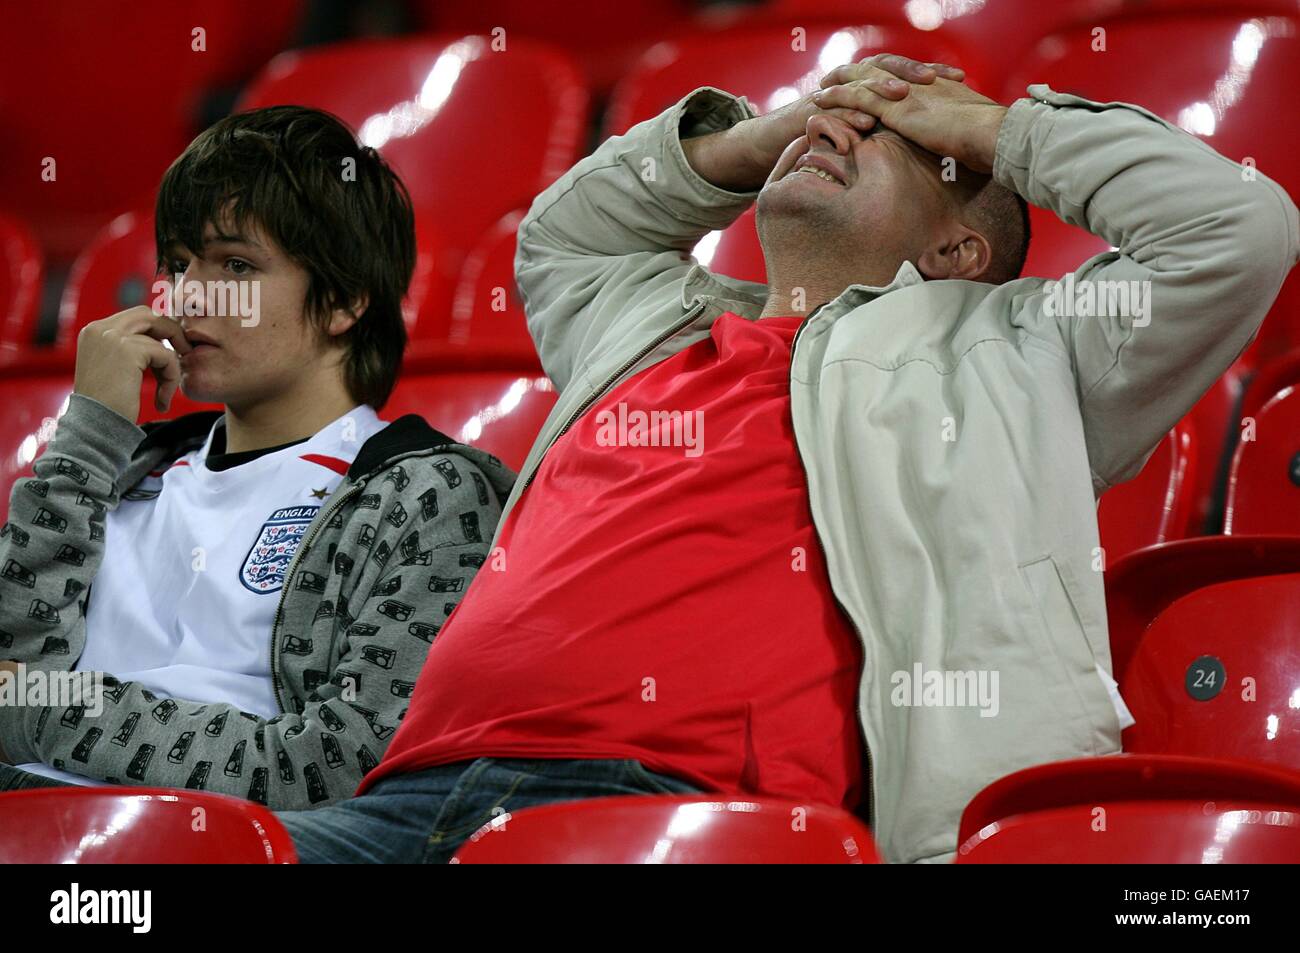 Soccer - UEFA European Championship 2008 Qualifying - Group E - England v Croatia - Wembley Stadium. England fans sit dejected after their side failed to qualify for the UEFA European Championship's Stock Photo